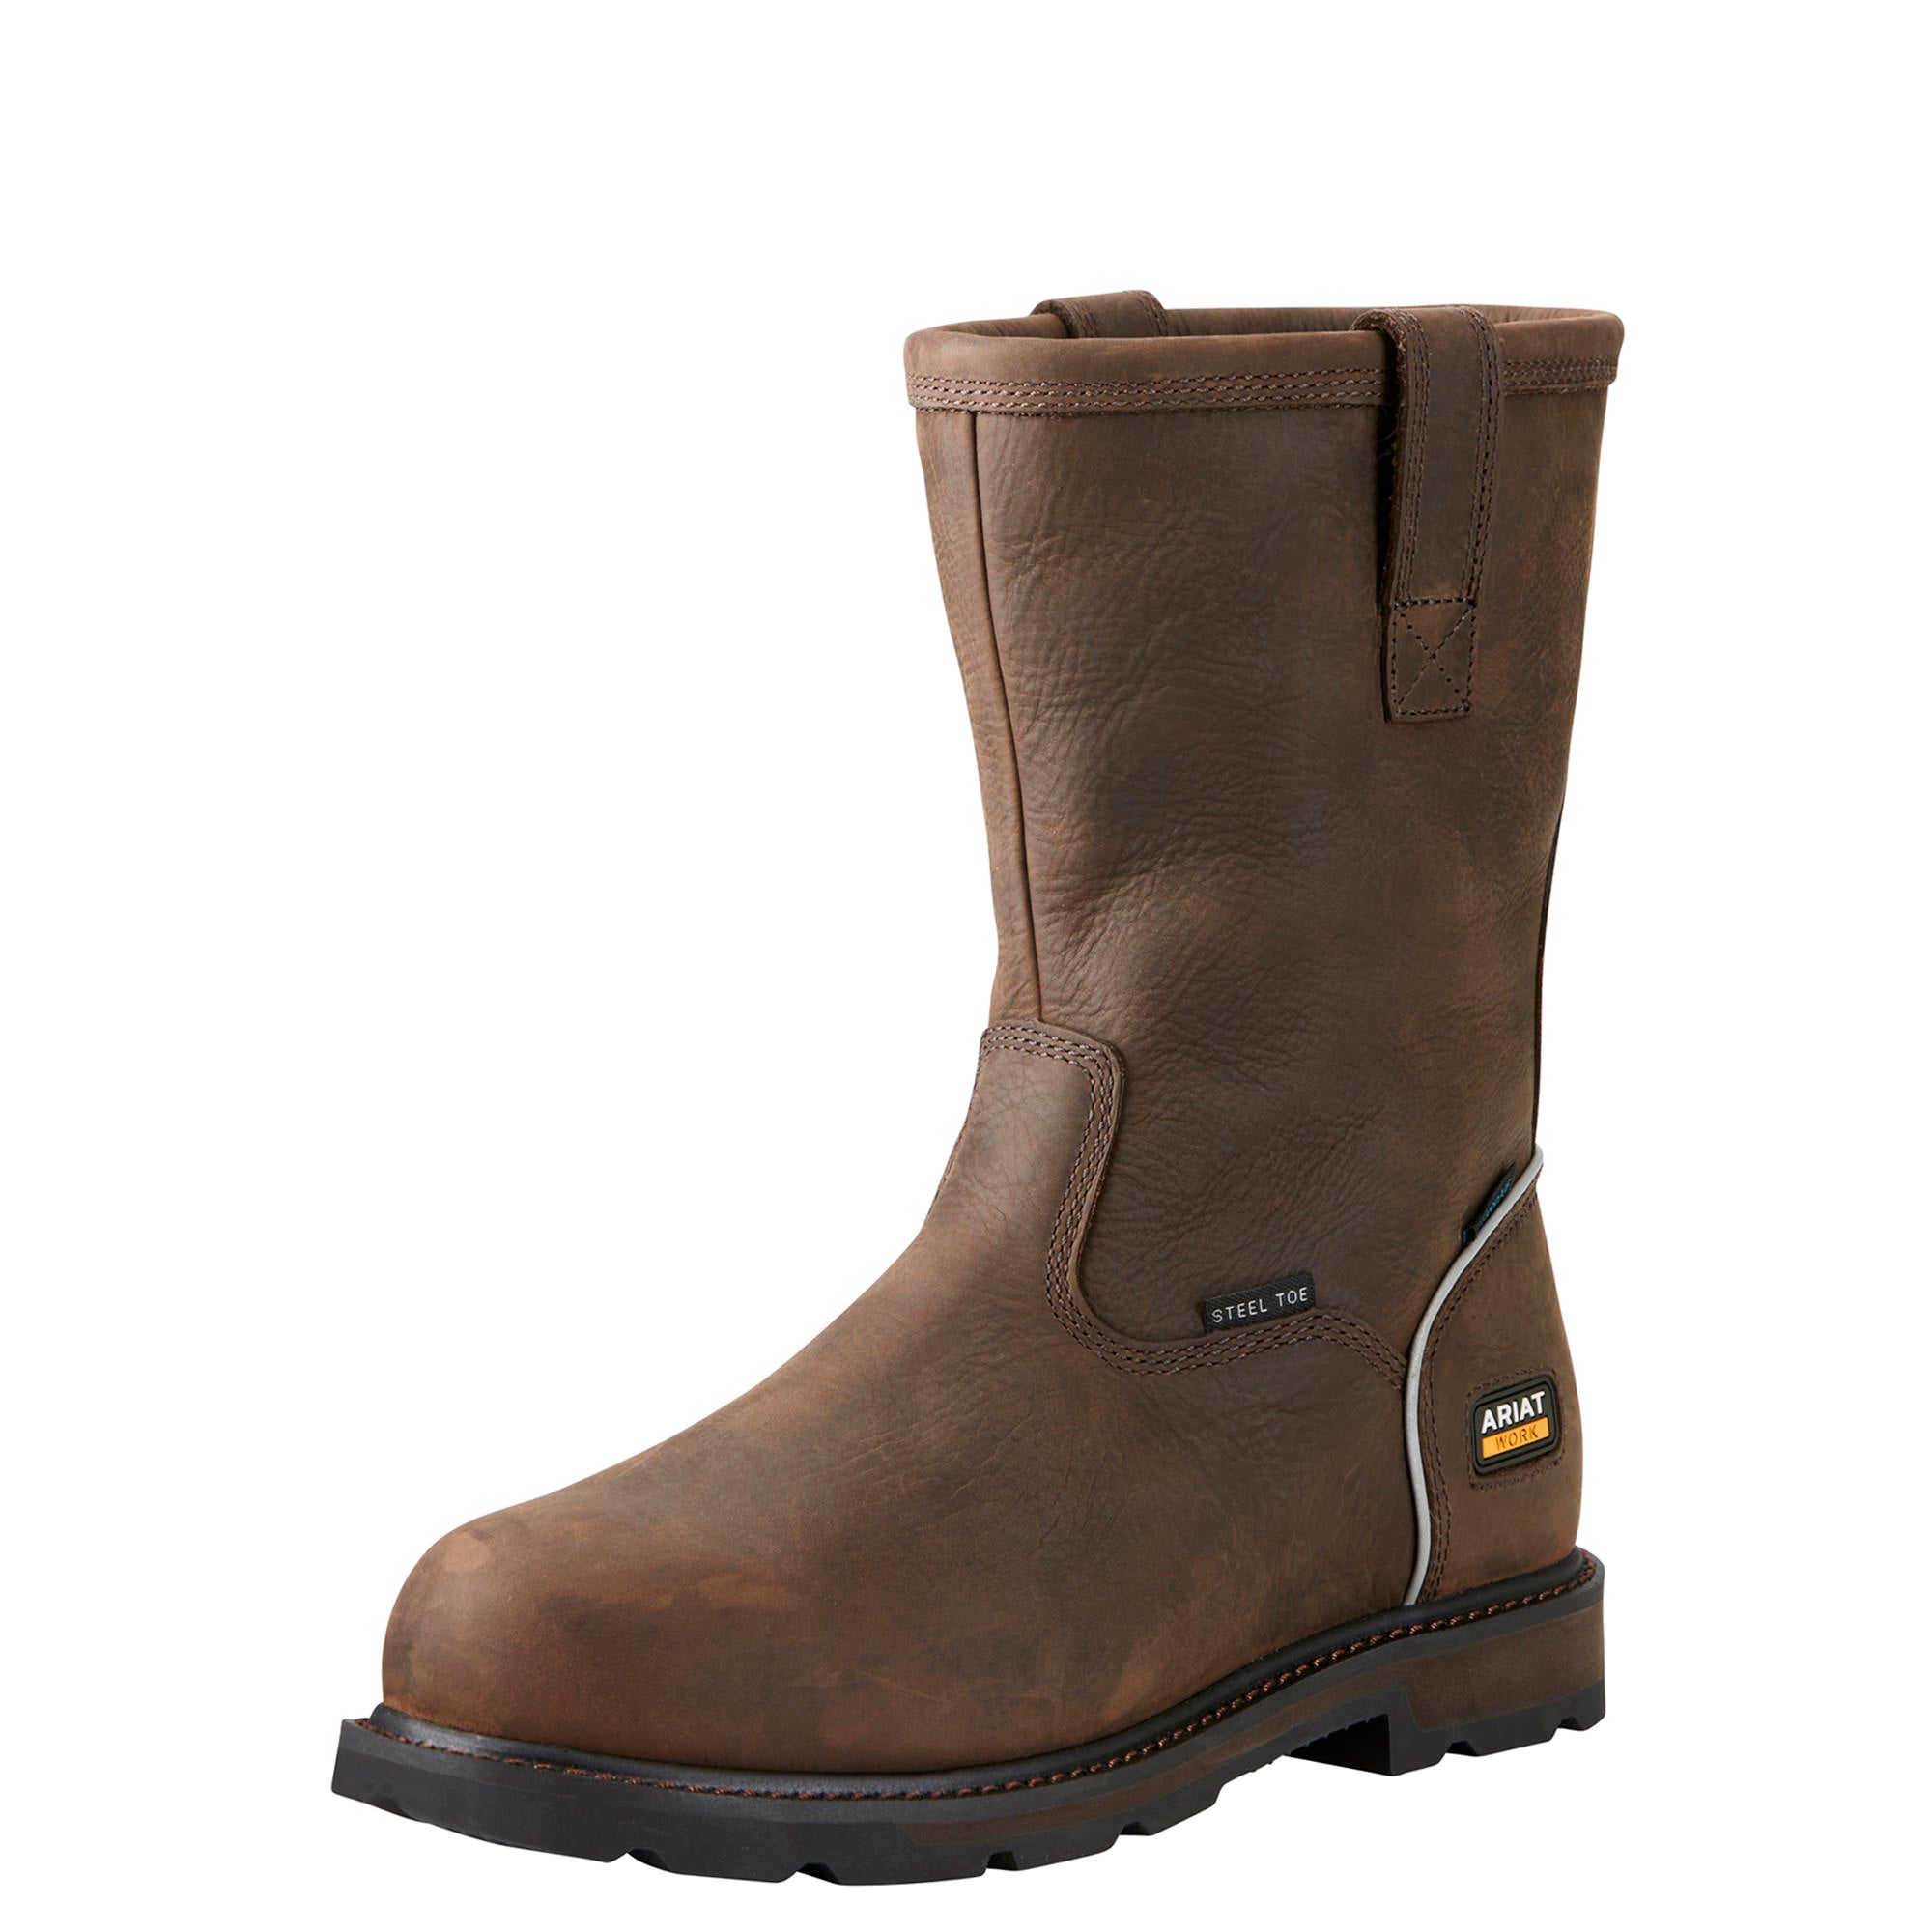 Ariat Groundbreaker H2O Steel Toe Rigger Boot | Ariat Safety Boots ...